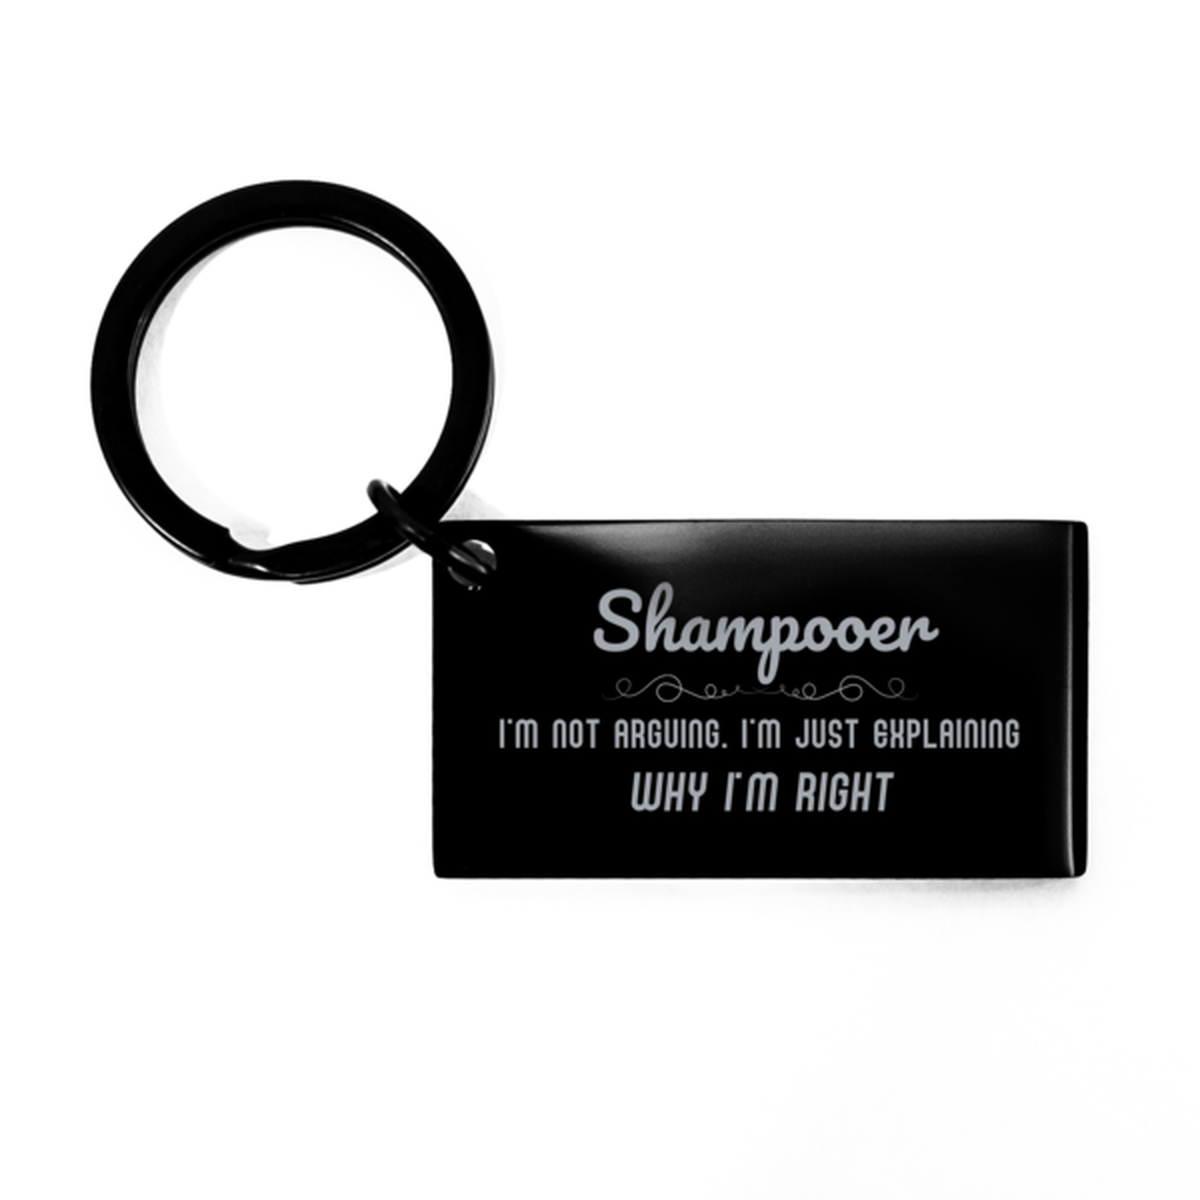 Shampooer I'm not Arguing. I'm Just Explaining Why I'm RIGHT Keychain, Funny Saying Quote Shampooer Gifts For Shampooer Graduation Birthday Christmas Gifts for Men Women Coworker